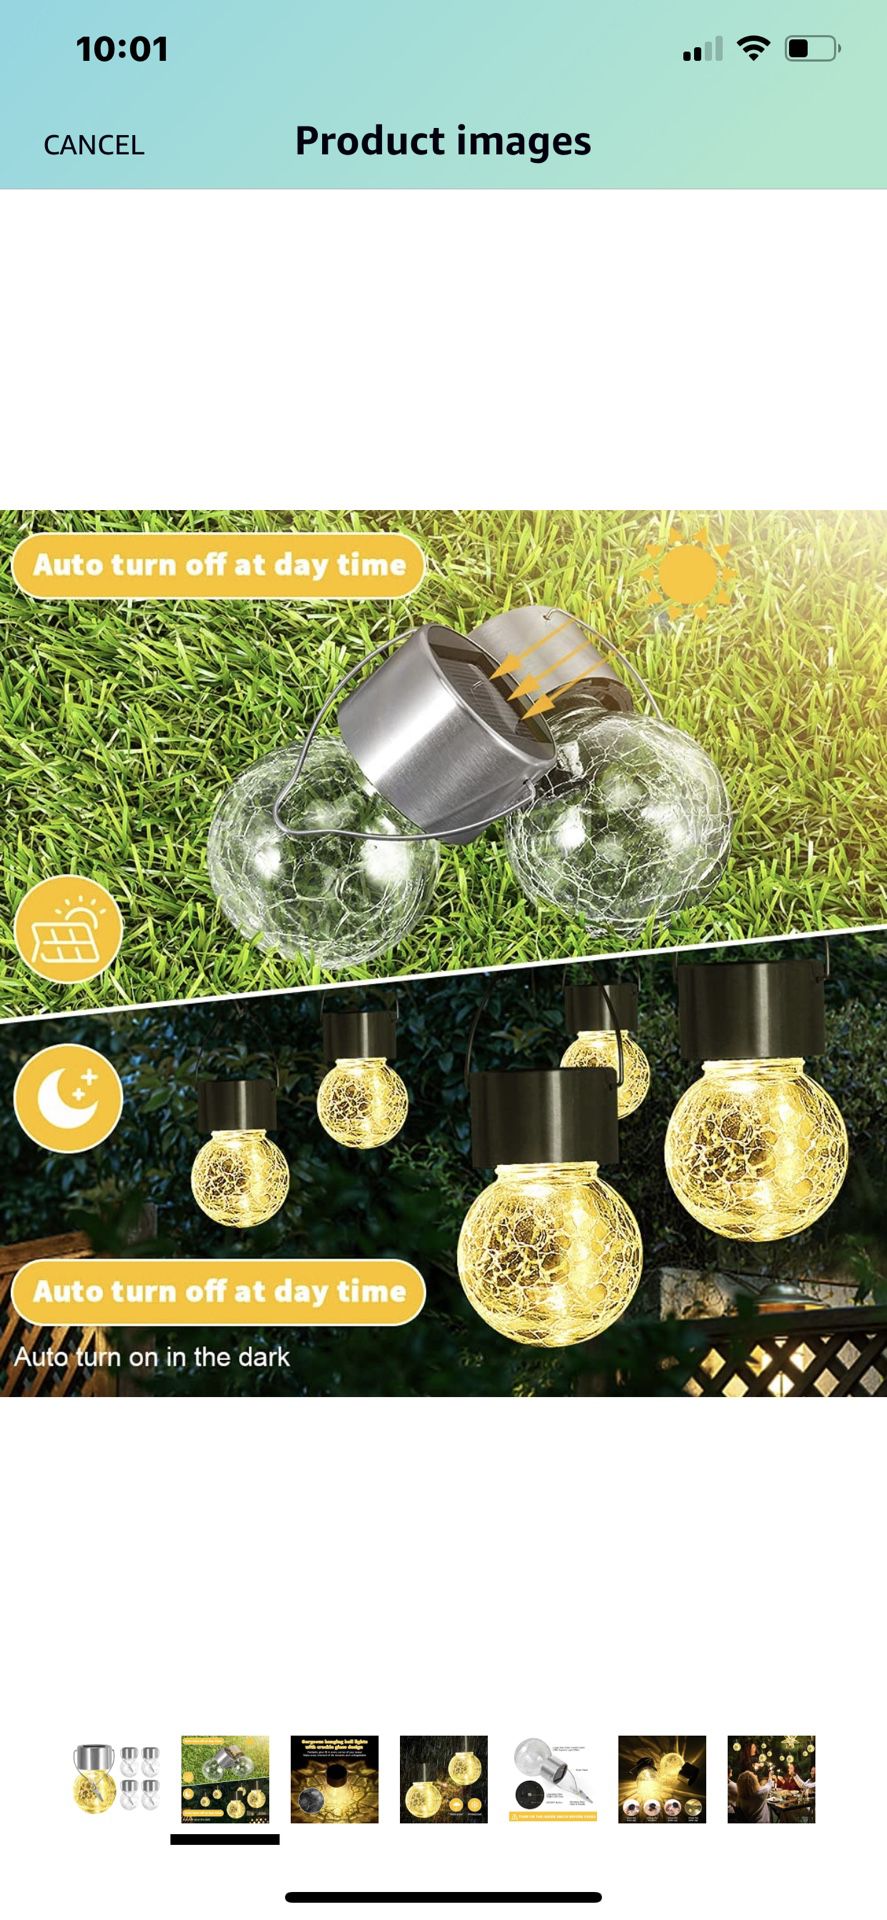  Hanging Solar Lights Outdoor Decorative, 12 Pack Warm LED Hanging Solar Lantern with Handle and Clip for Garden Yard Patio, Fence Tree Umbrella, NEW